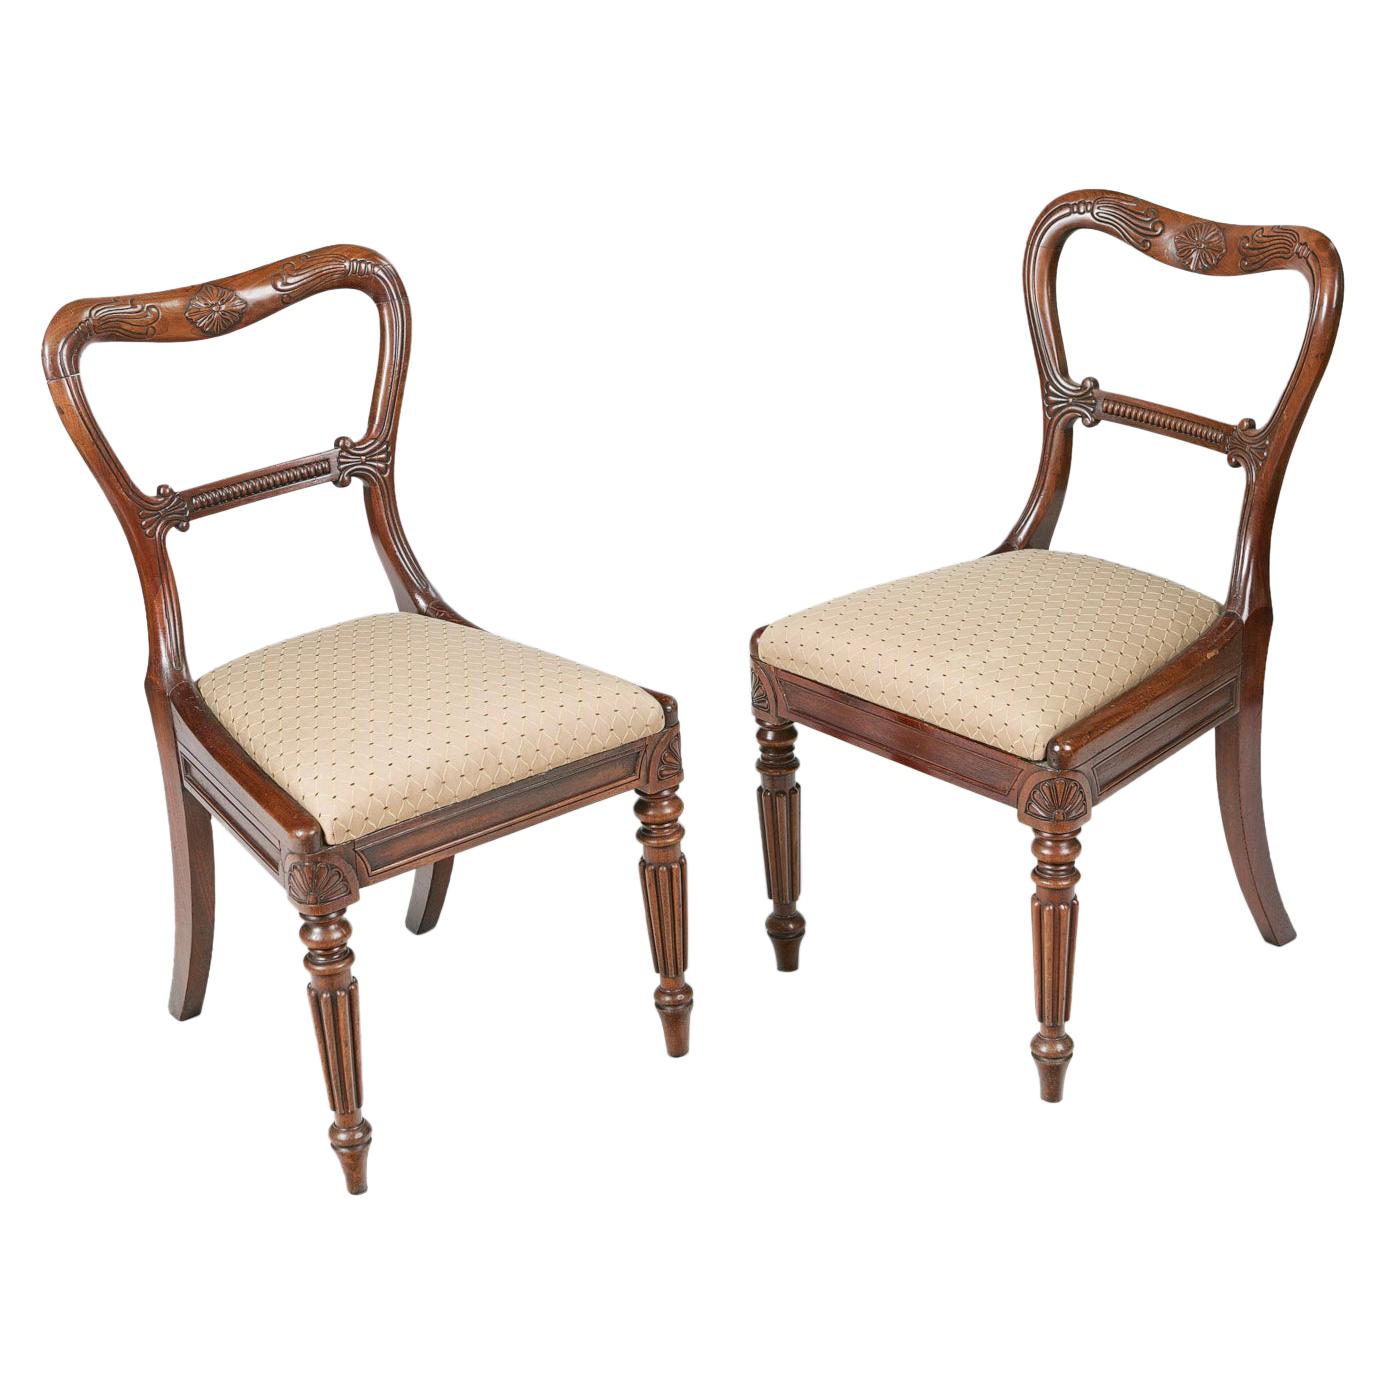 Early 19th Century George IV Pair of Chairs by Gillows of Lancaster and London